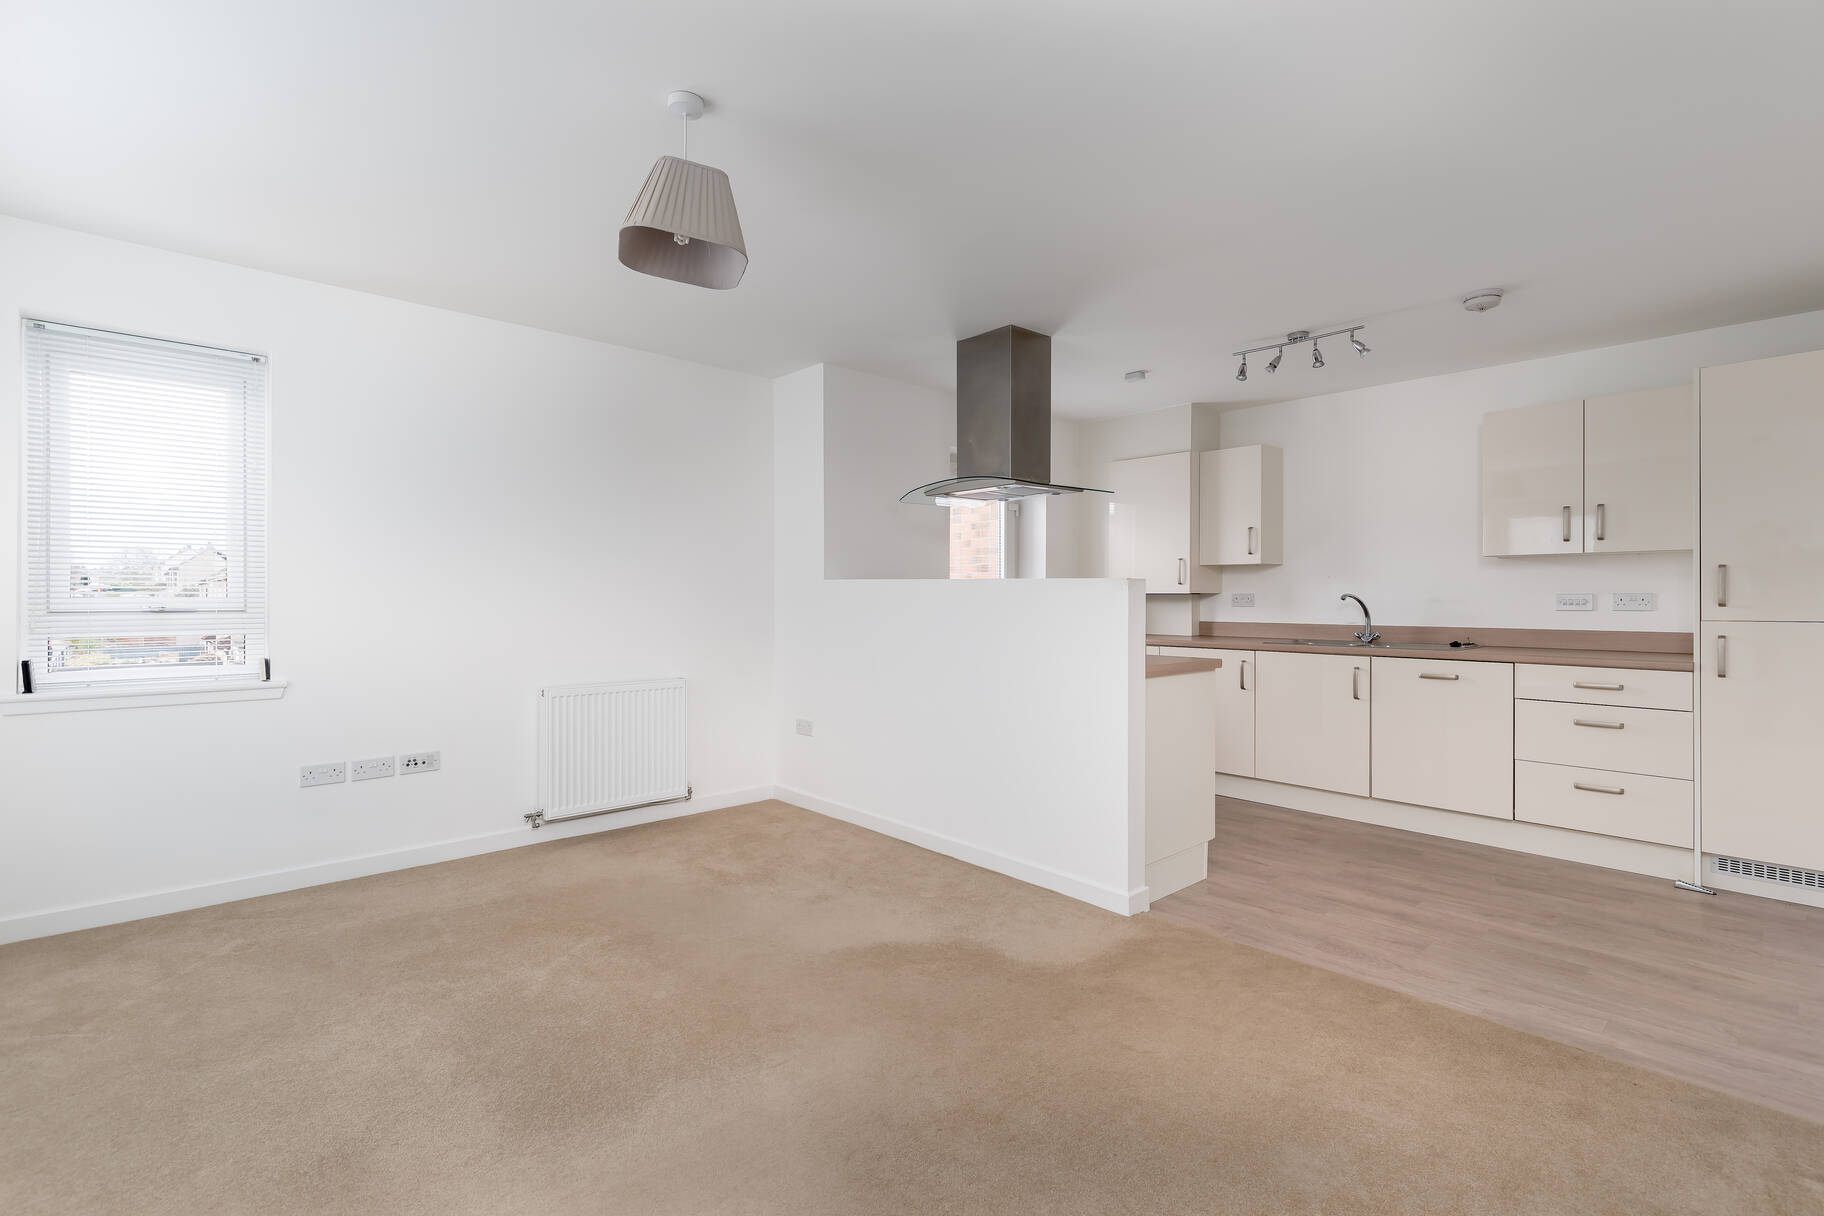 Flat 8, 2, Langwill Place, Currie, EH14 5NL